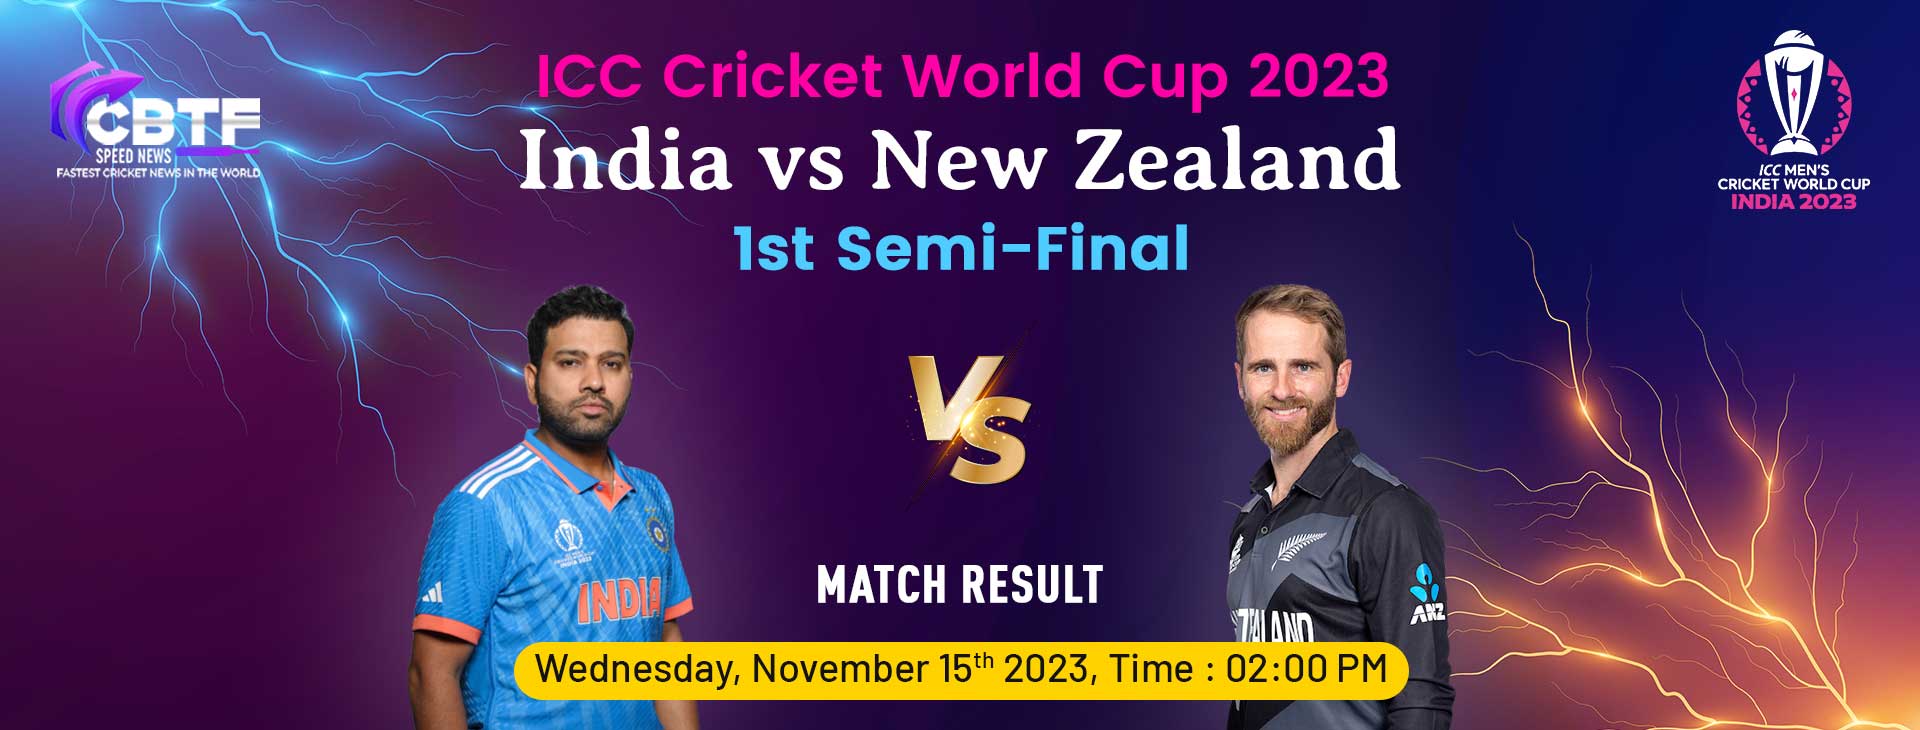 Icc Cwc 2023 Semi Final 1 India Reaches Final Routing New Zealand By 70 Runs 5211